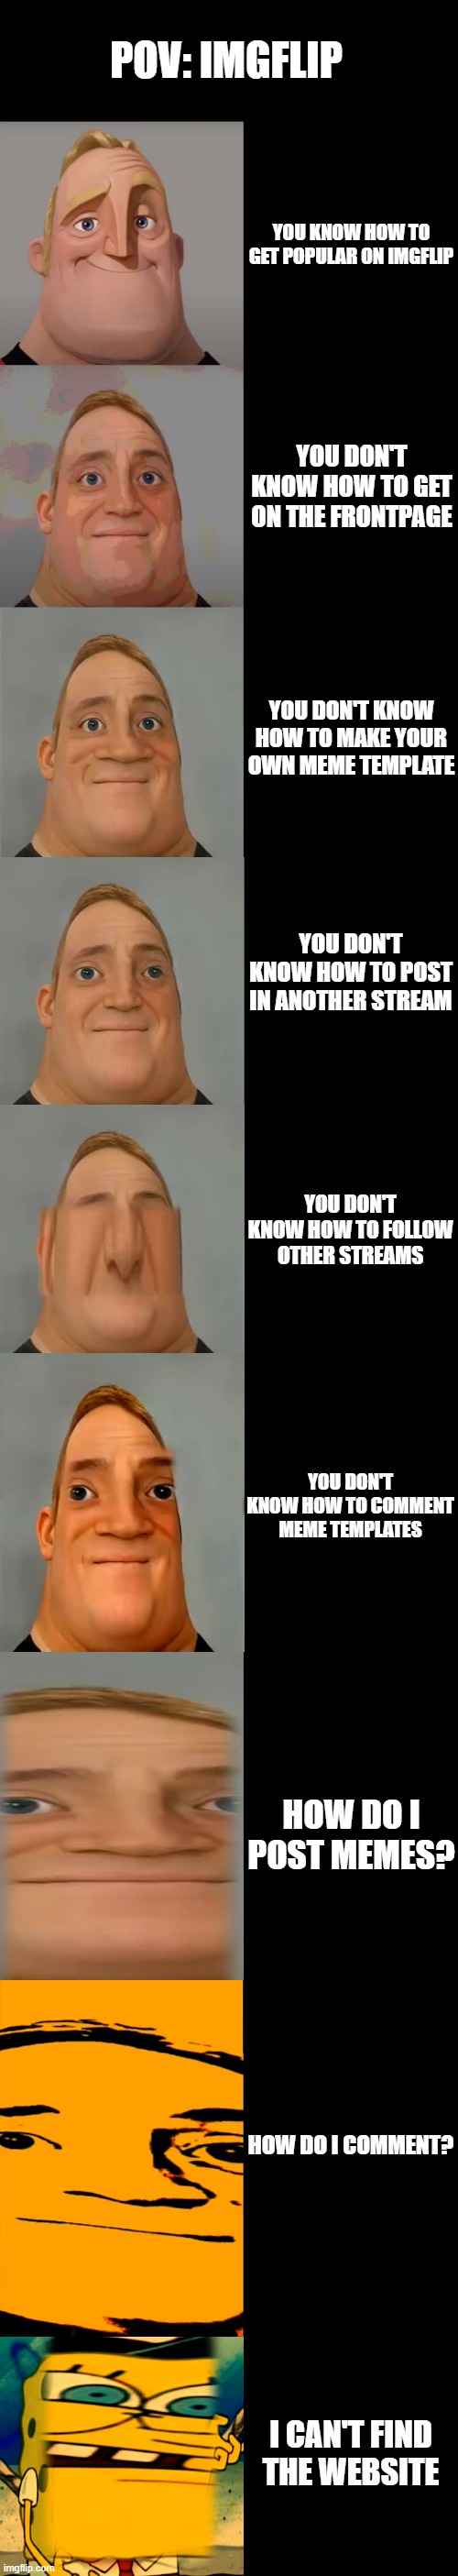 Mr Incredible becoming Idiot template | POV: IMGFLIP; YOU KNOW HOW TO GET POPULAR ON IMGFLIP; YOU DON'T KNOW HOW TO GET ON THE FRONTPAGE; YOU DON'T KNOW HOW TO MAKE YOUR OWN MEME TEMPLATE; YOU DON'T KNOW HOW TO POST IN ANOTHER STREAM; YOU DON'T KNOW HOW TO FOLLOW OTHER STREAMS; YOU DON'T KNOW HOW TO COMMENT MEME TEMPLATES; HOW DO I POST MEMES? HOW DO I COMMENT? I CAN'T FIND THE WEBSITE | image tagged in mr incredible becoming idiot template | made w/ Imgflip meme maker